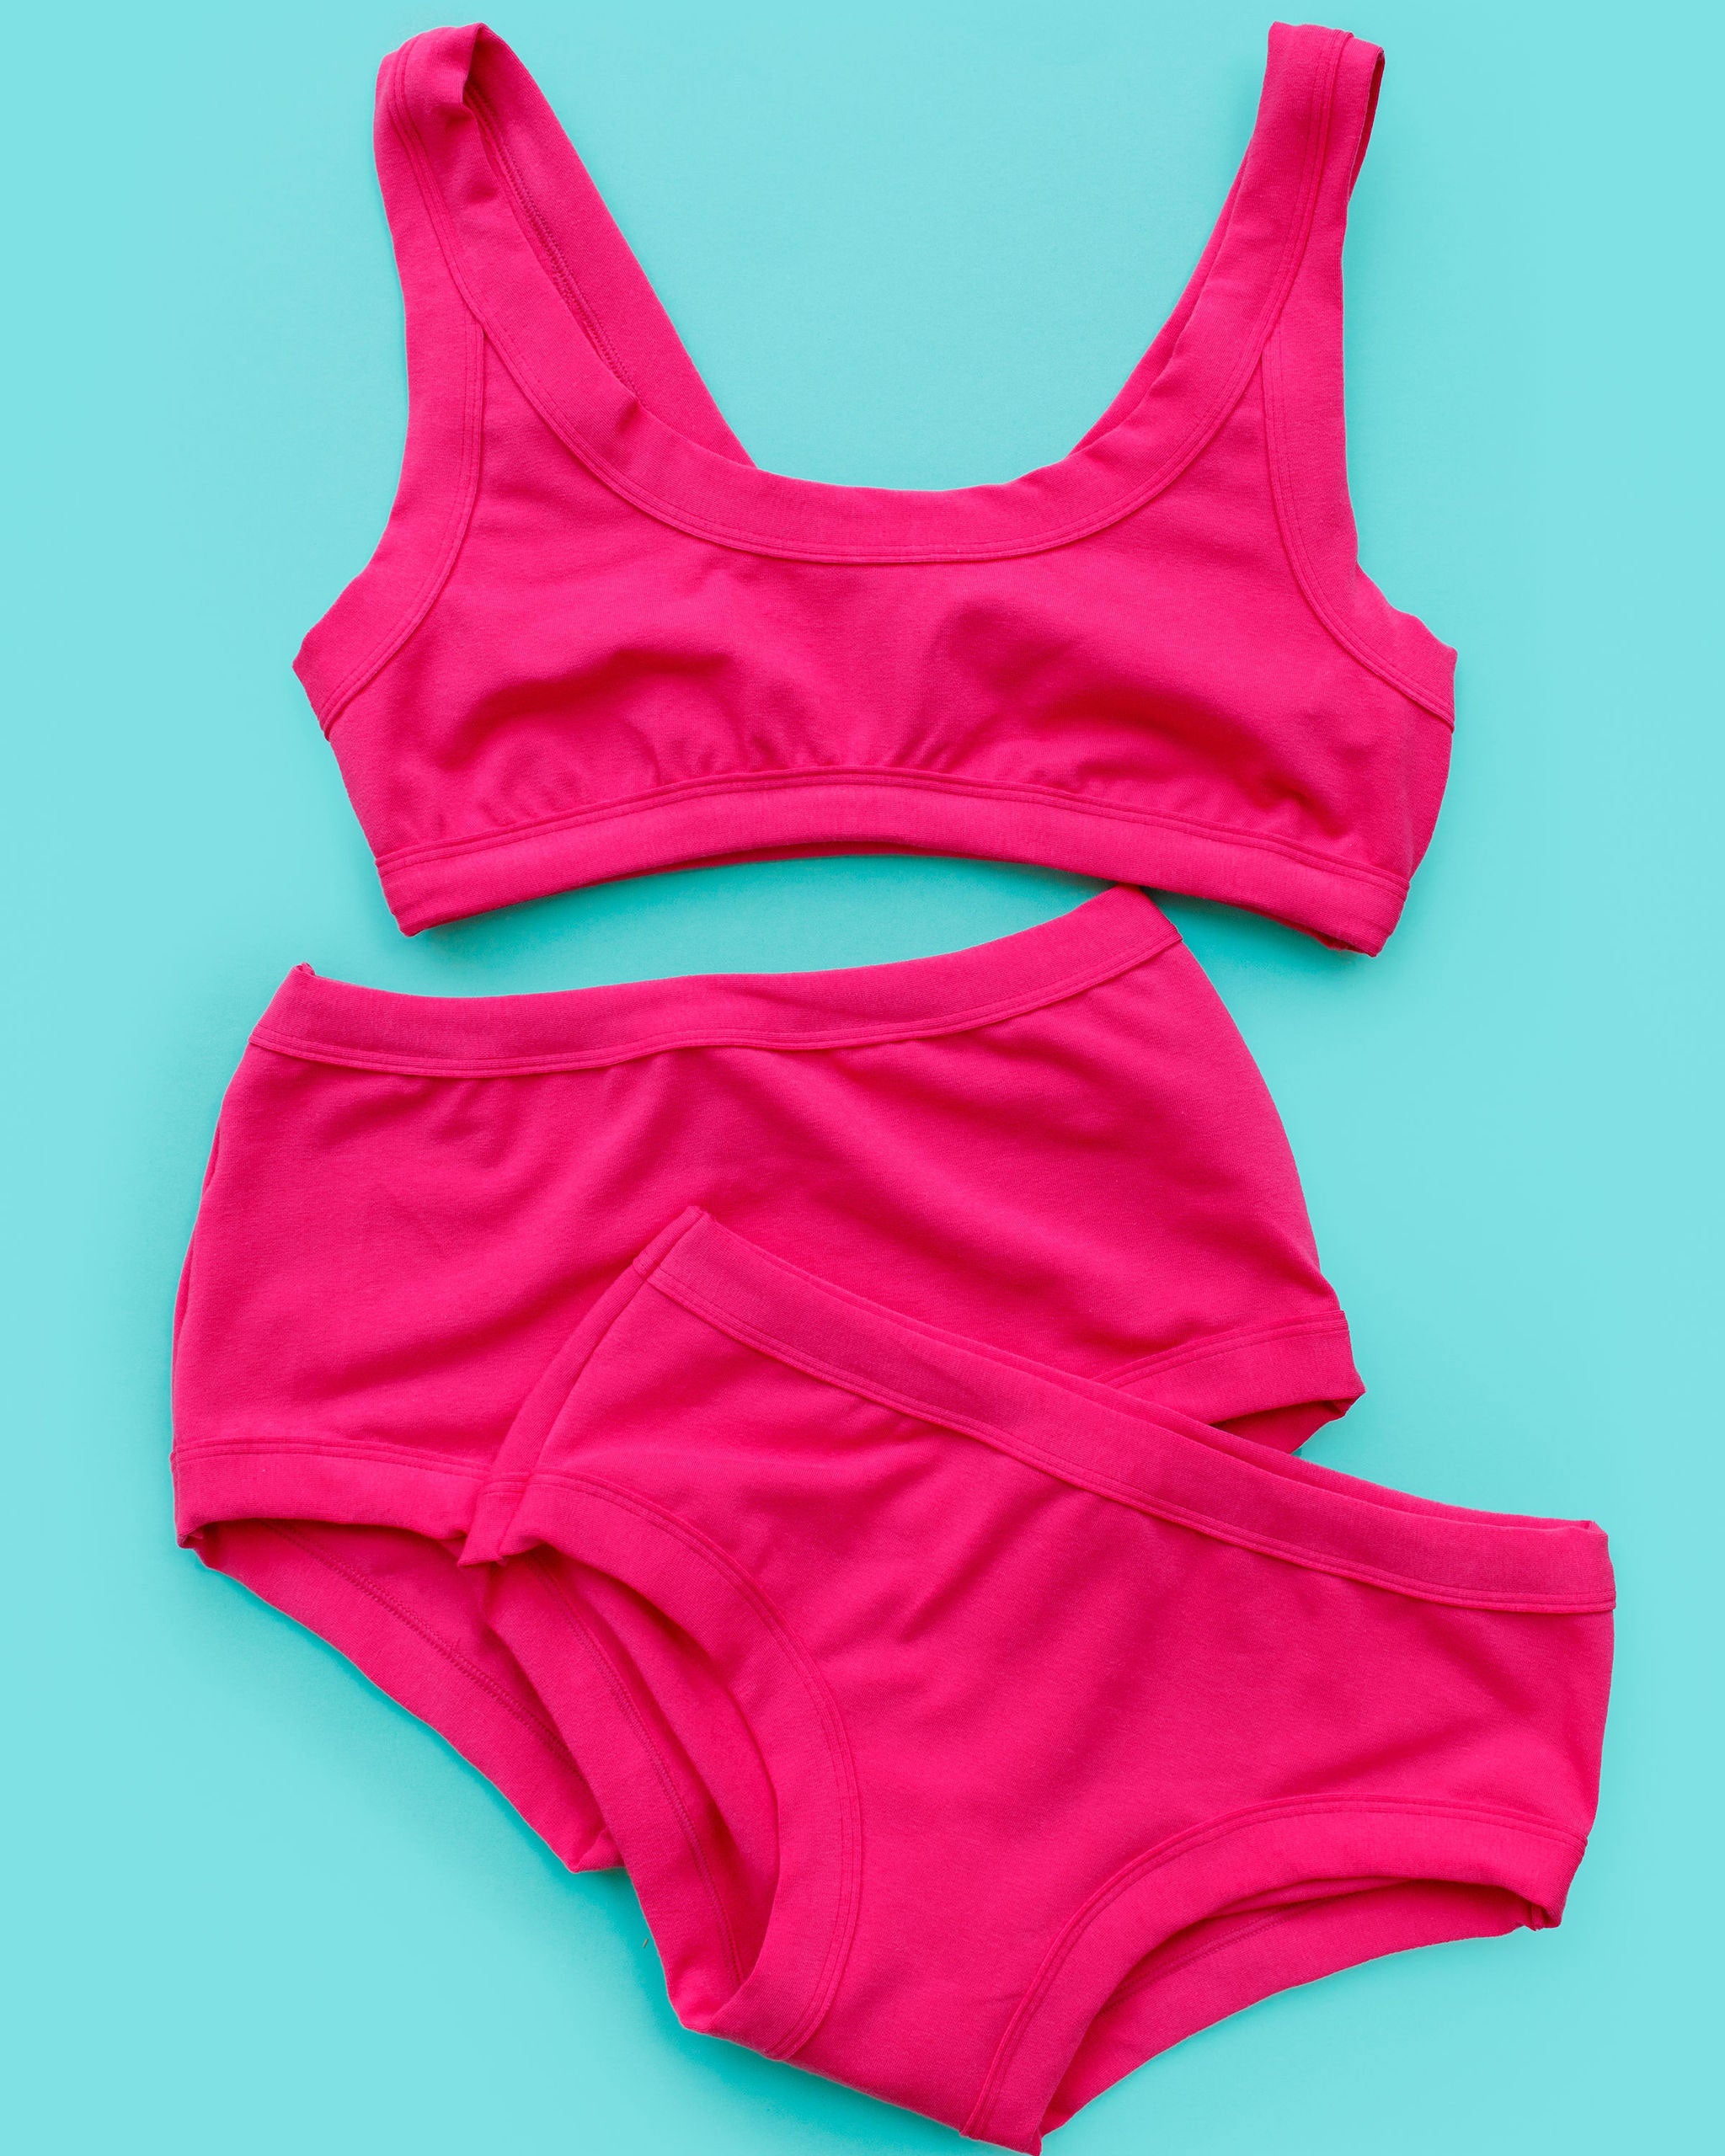 Flat lay of Thunderpants Bralette, Original style underwear, and Hipster style underwear in a hot pink color.